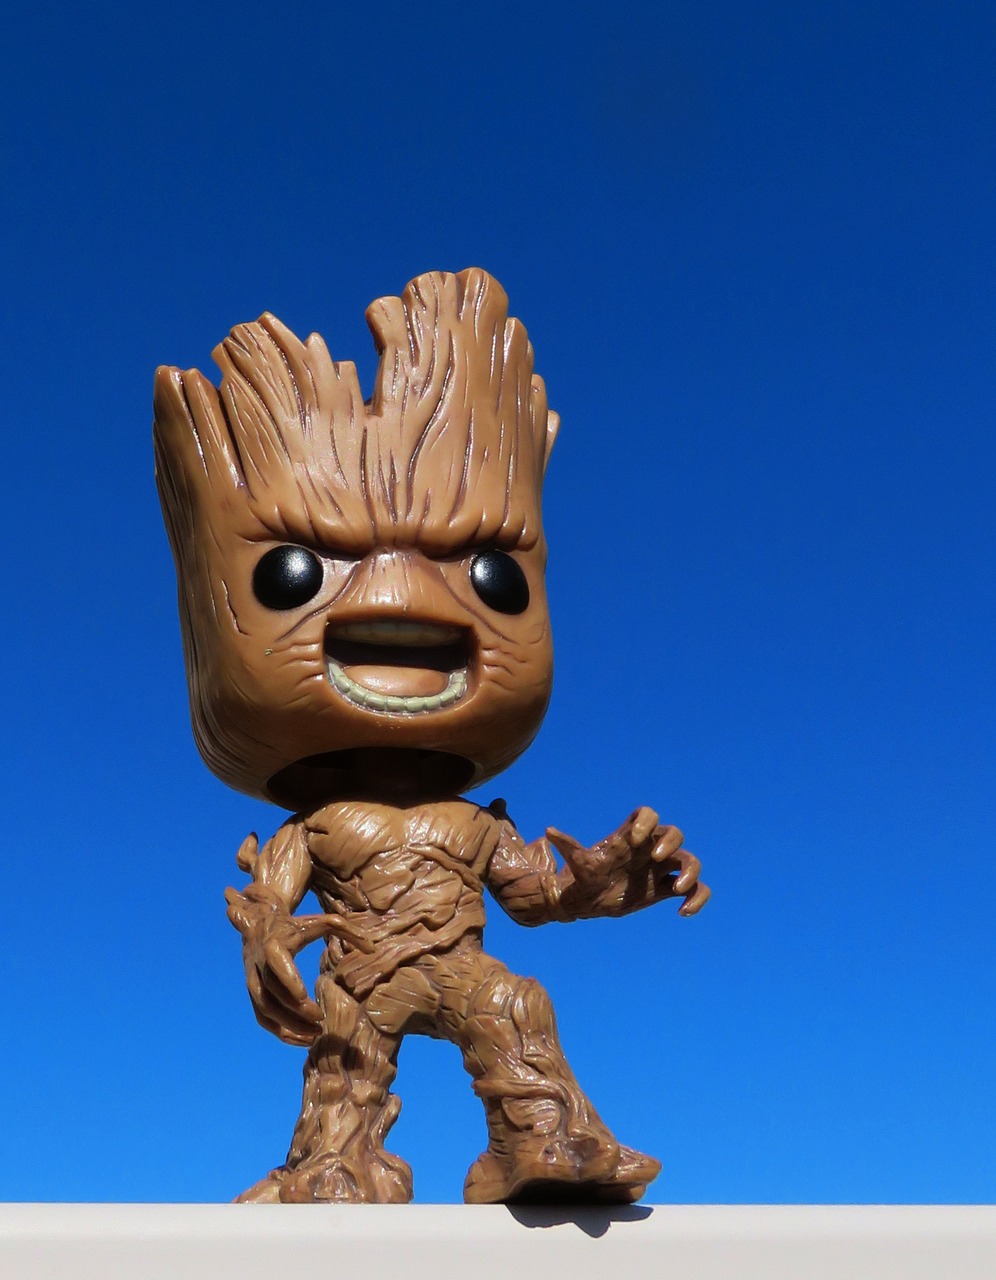 angry groot guardians of the galaxy action figure free photo